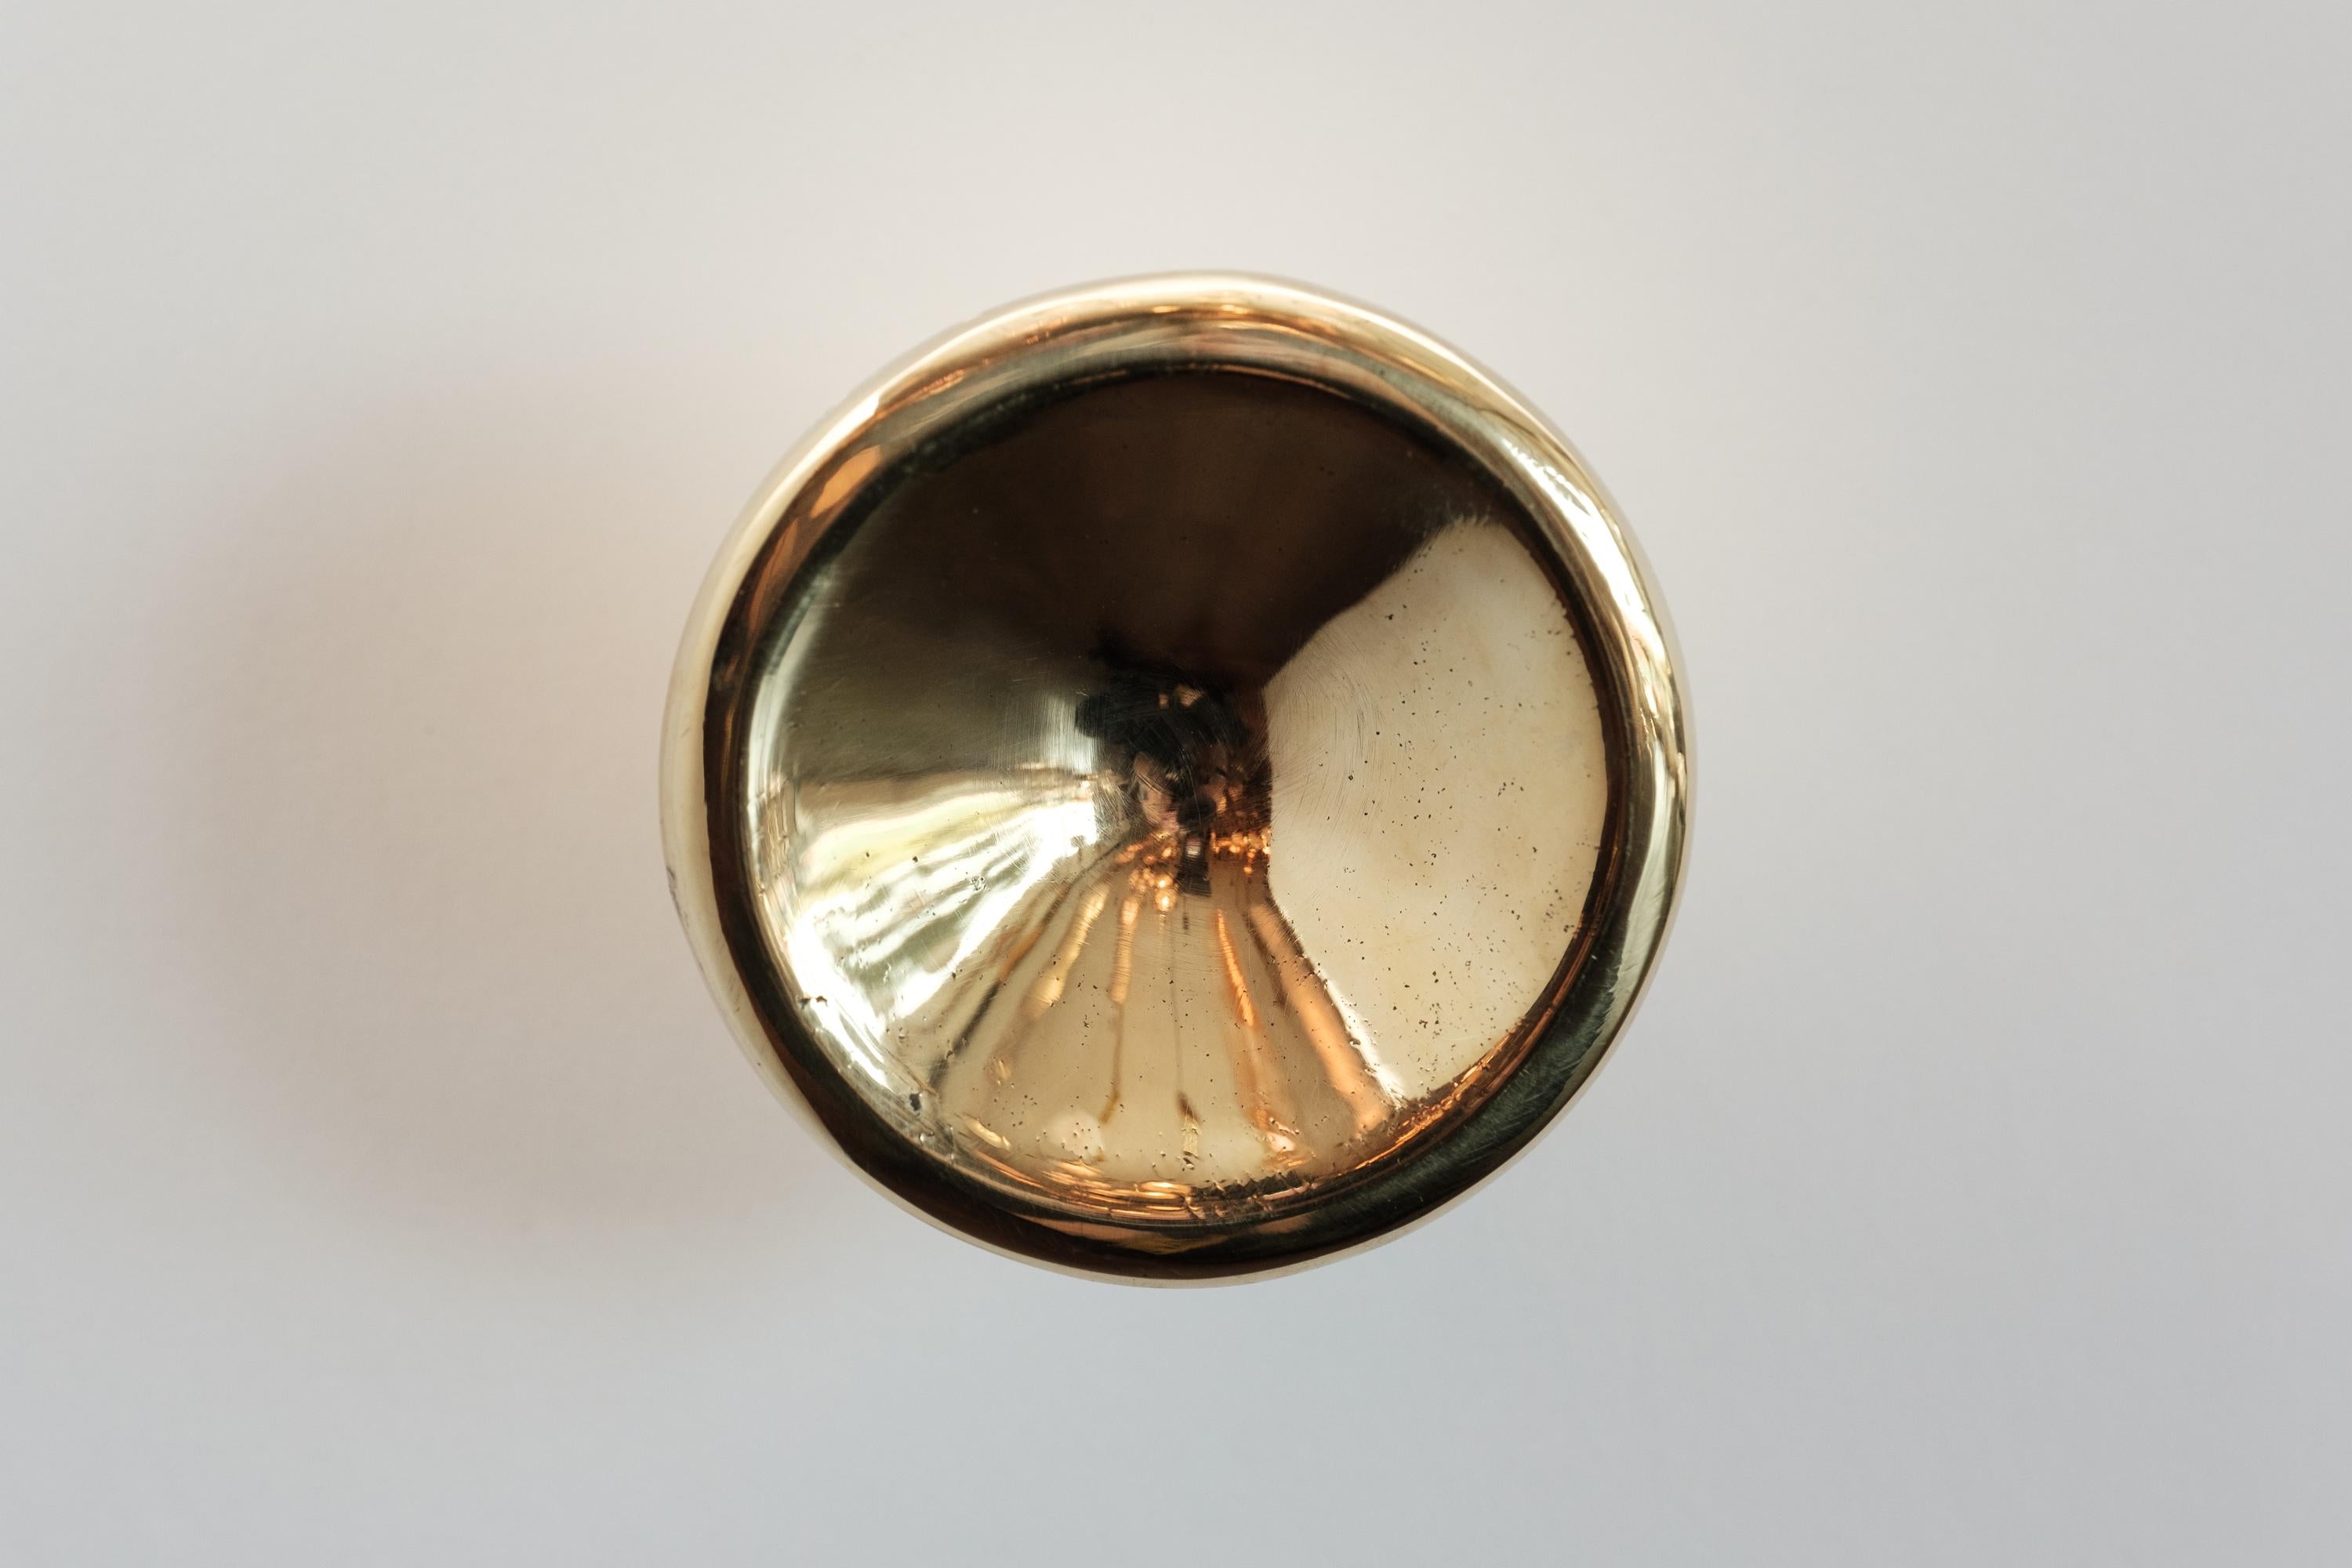 Carl Auböck Model #8040-2 polished brass knob.

Designed in the 1950s, this versatile and Minimalist Viennese knob is executed in polished brass by Werkstätte Carl Auböck, Austria. Its minimalist design combines clean form with